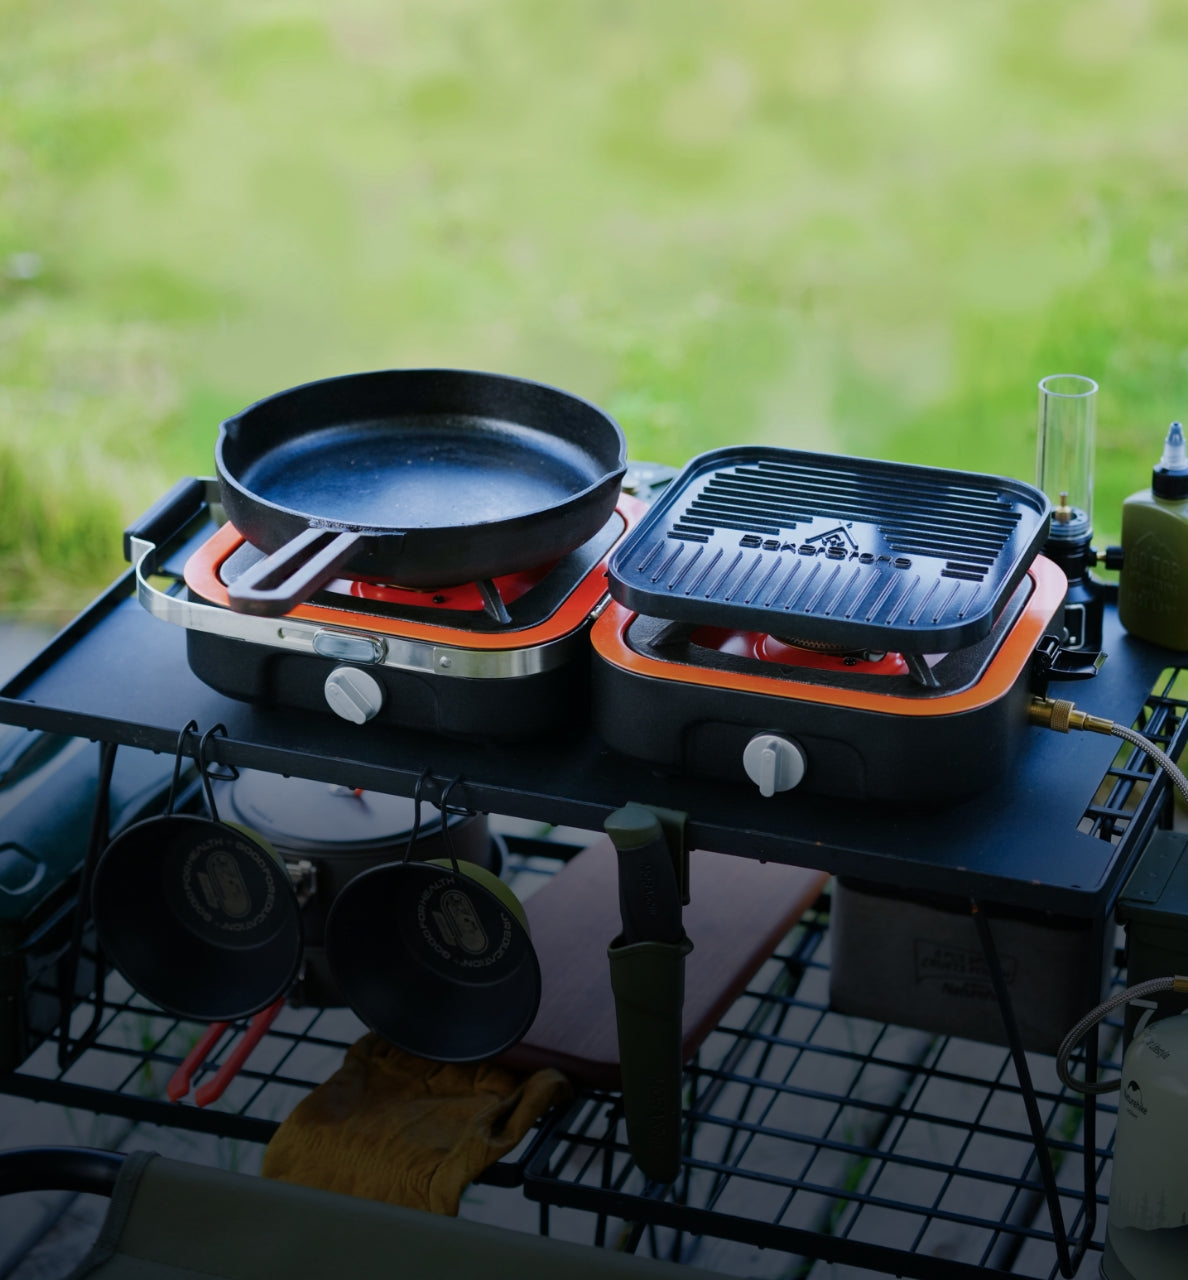 Outdoor Buddy Tabletop Grill